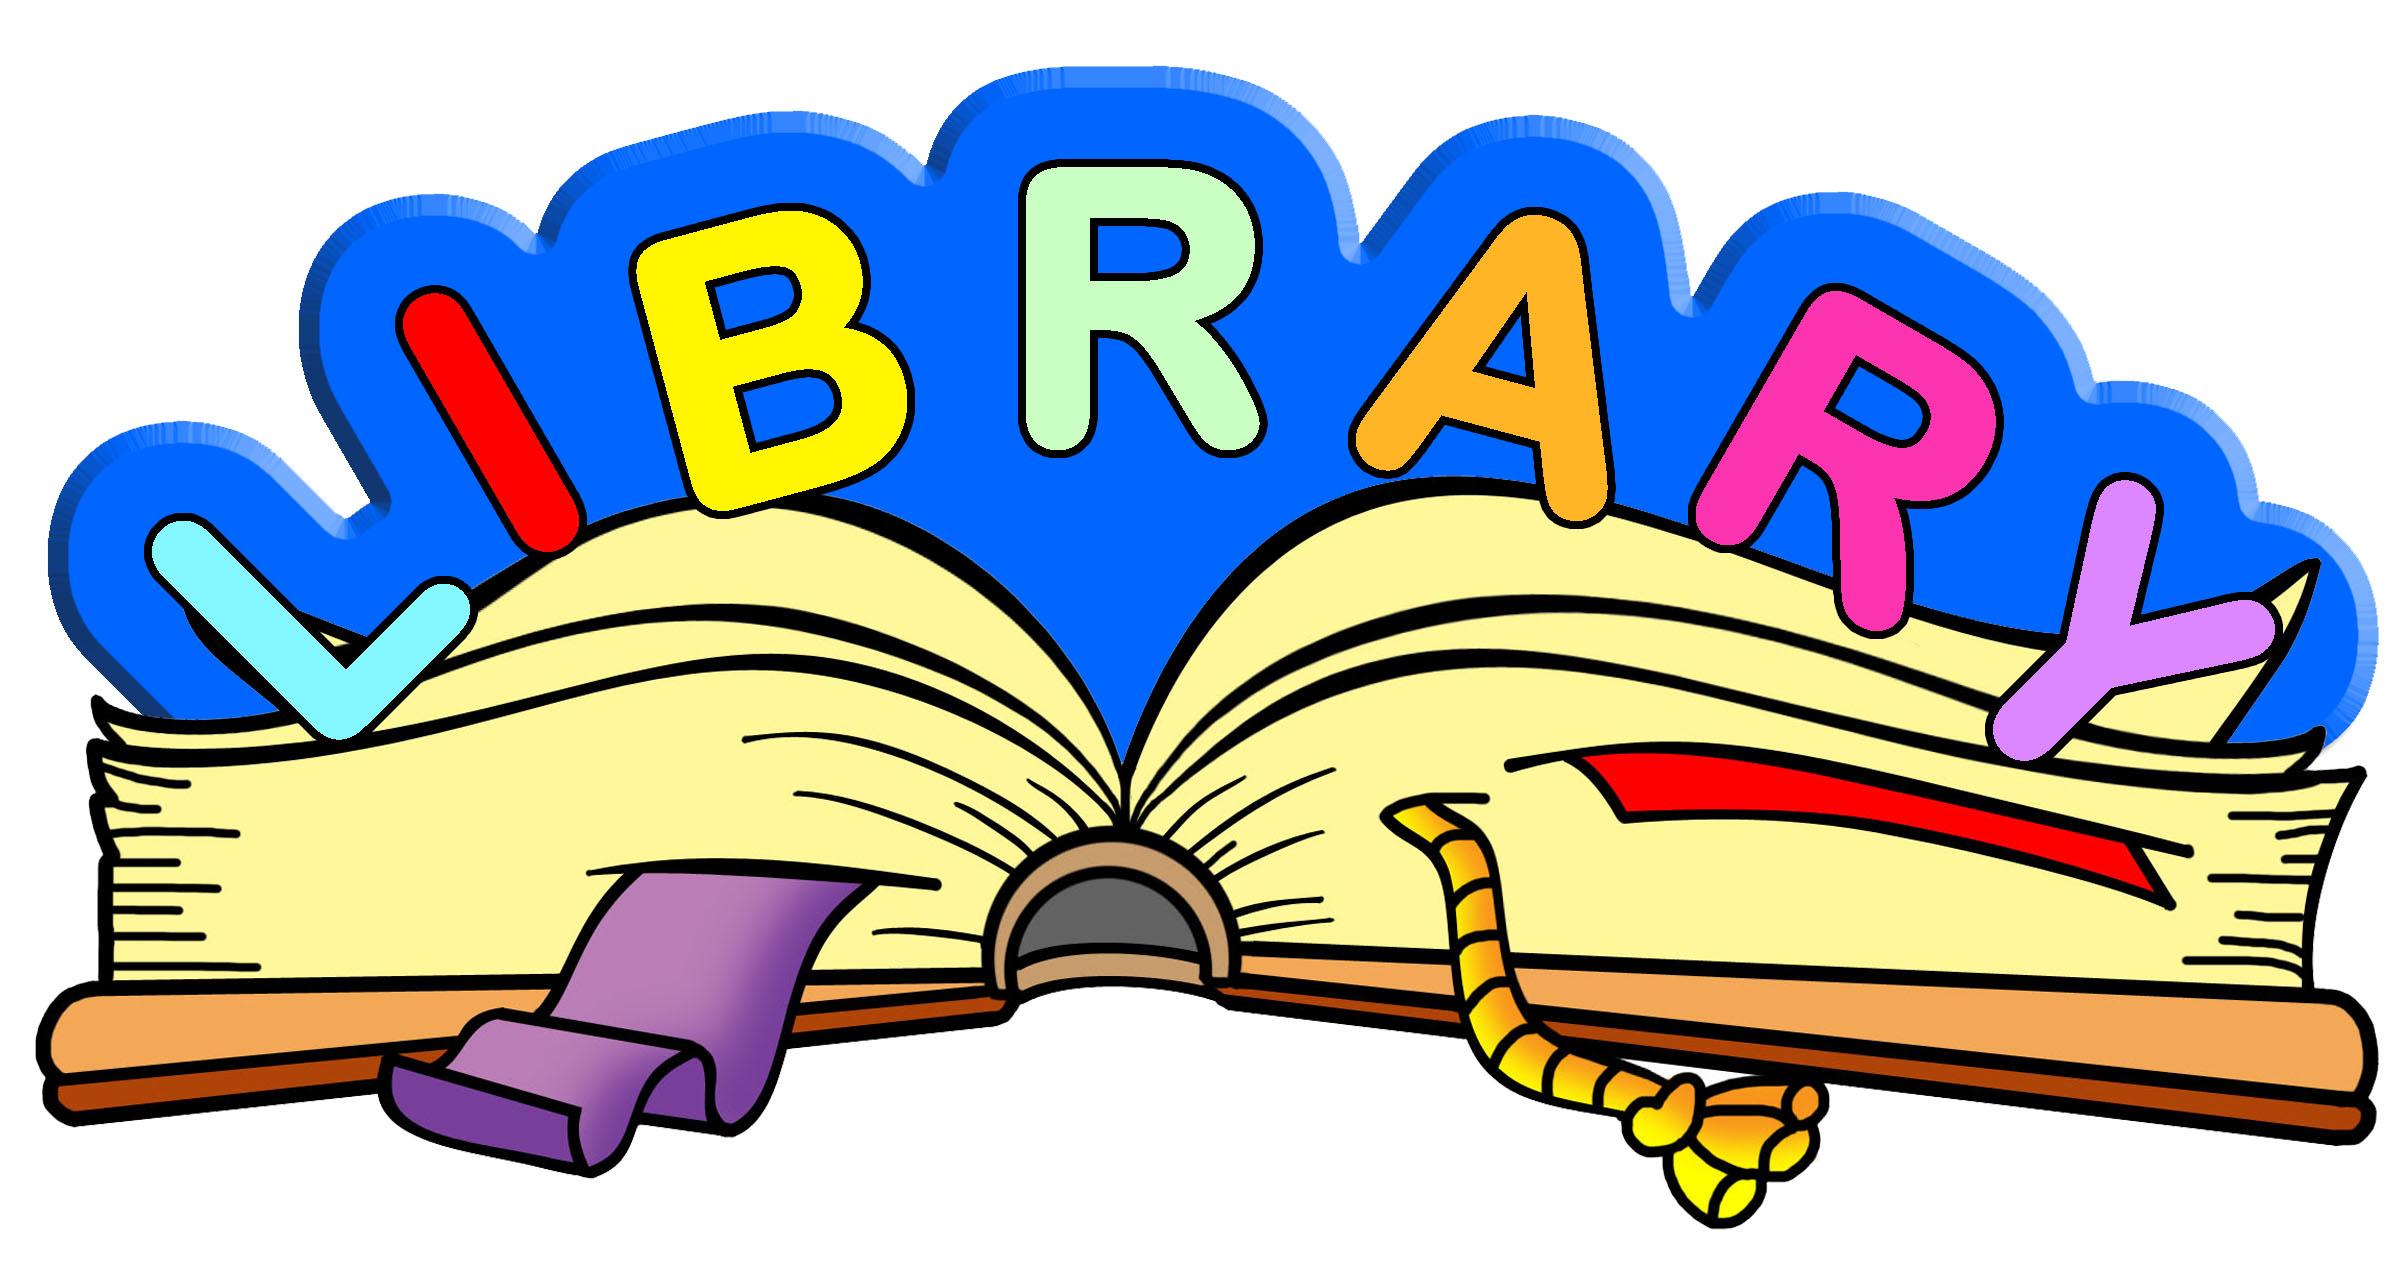 library clipart images - photo #23